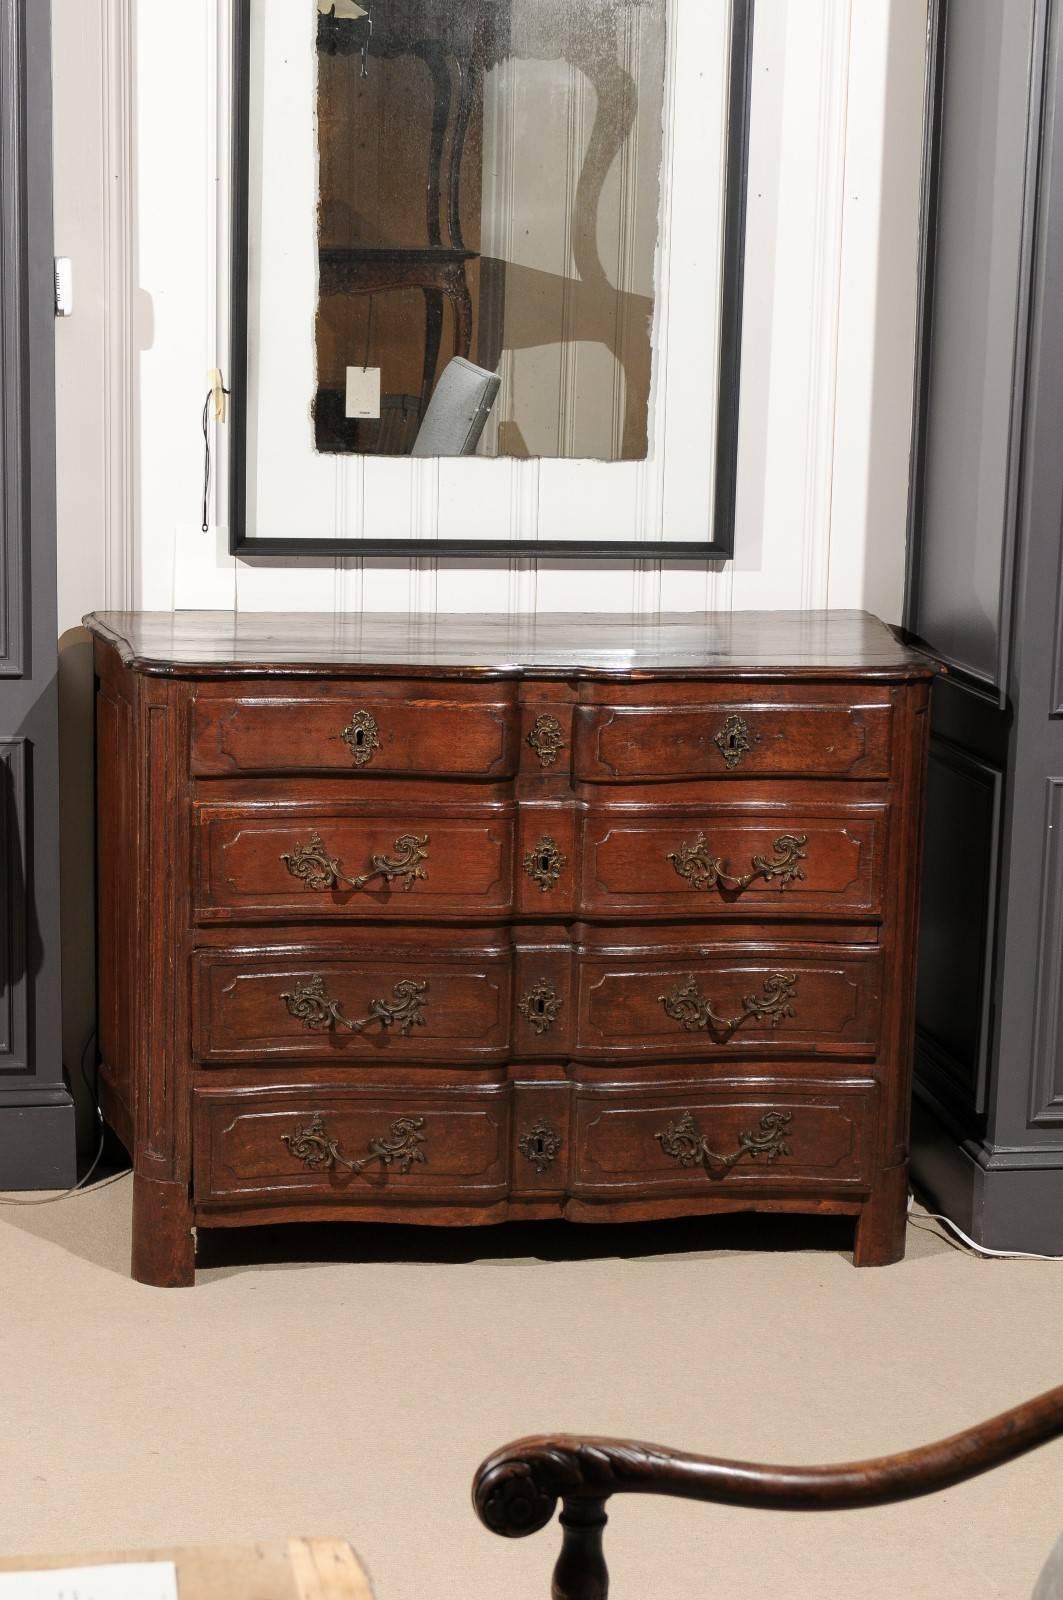 19th Century French Walnut Commode or Chest, Carved Drawers, Original Hardware, circa 1800 For Sale